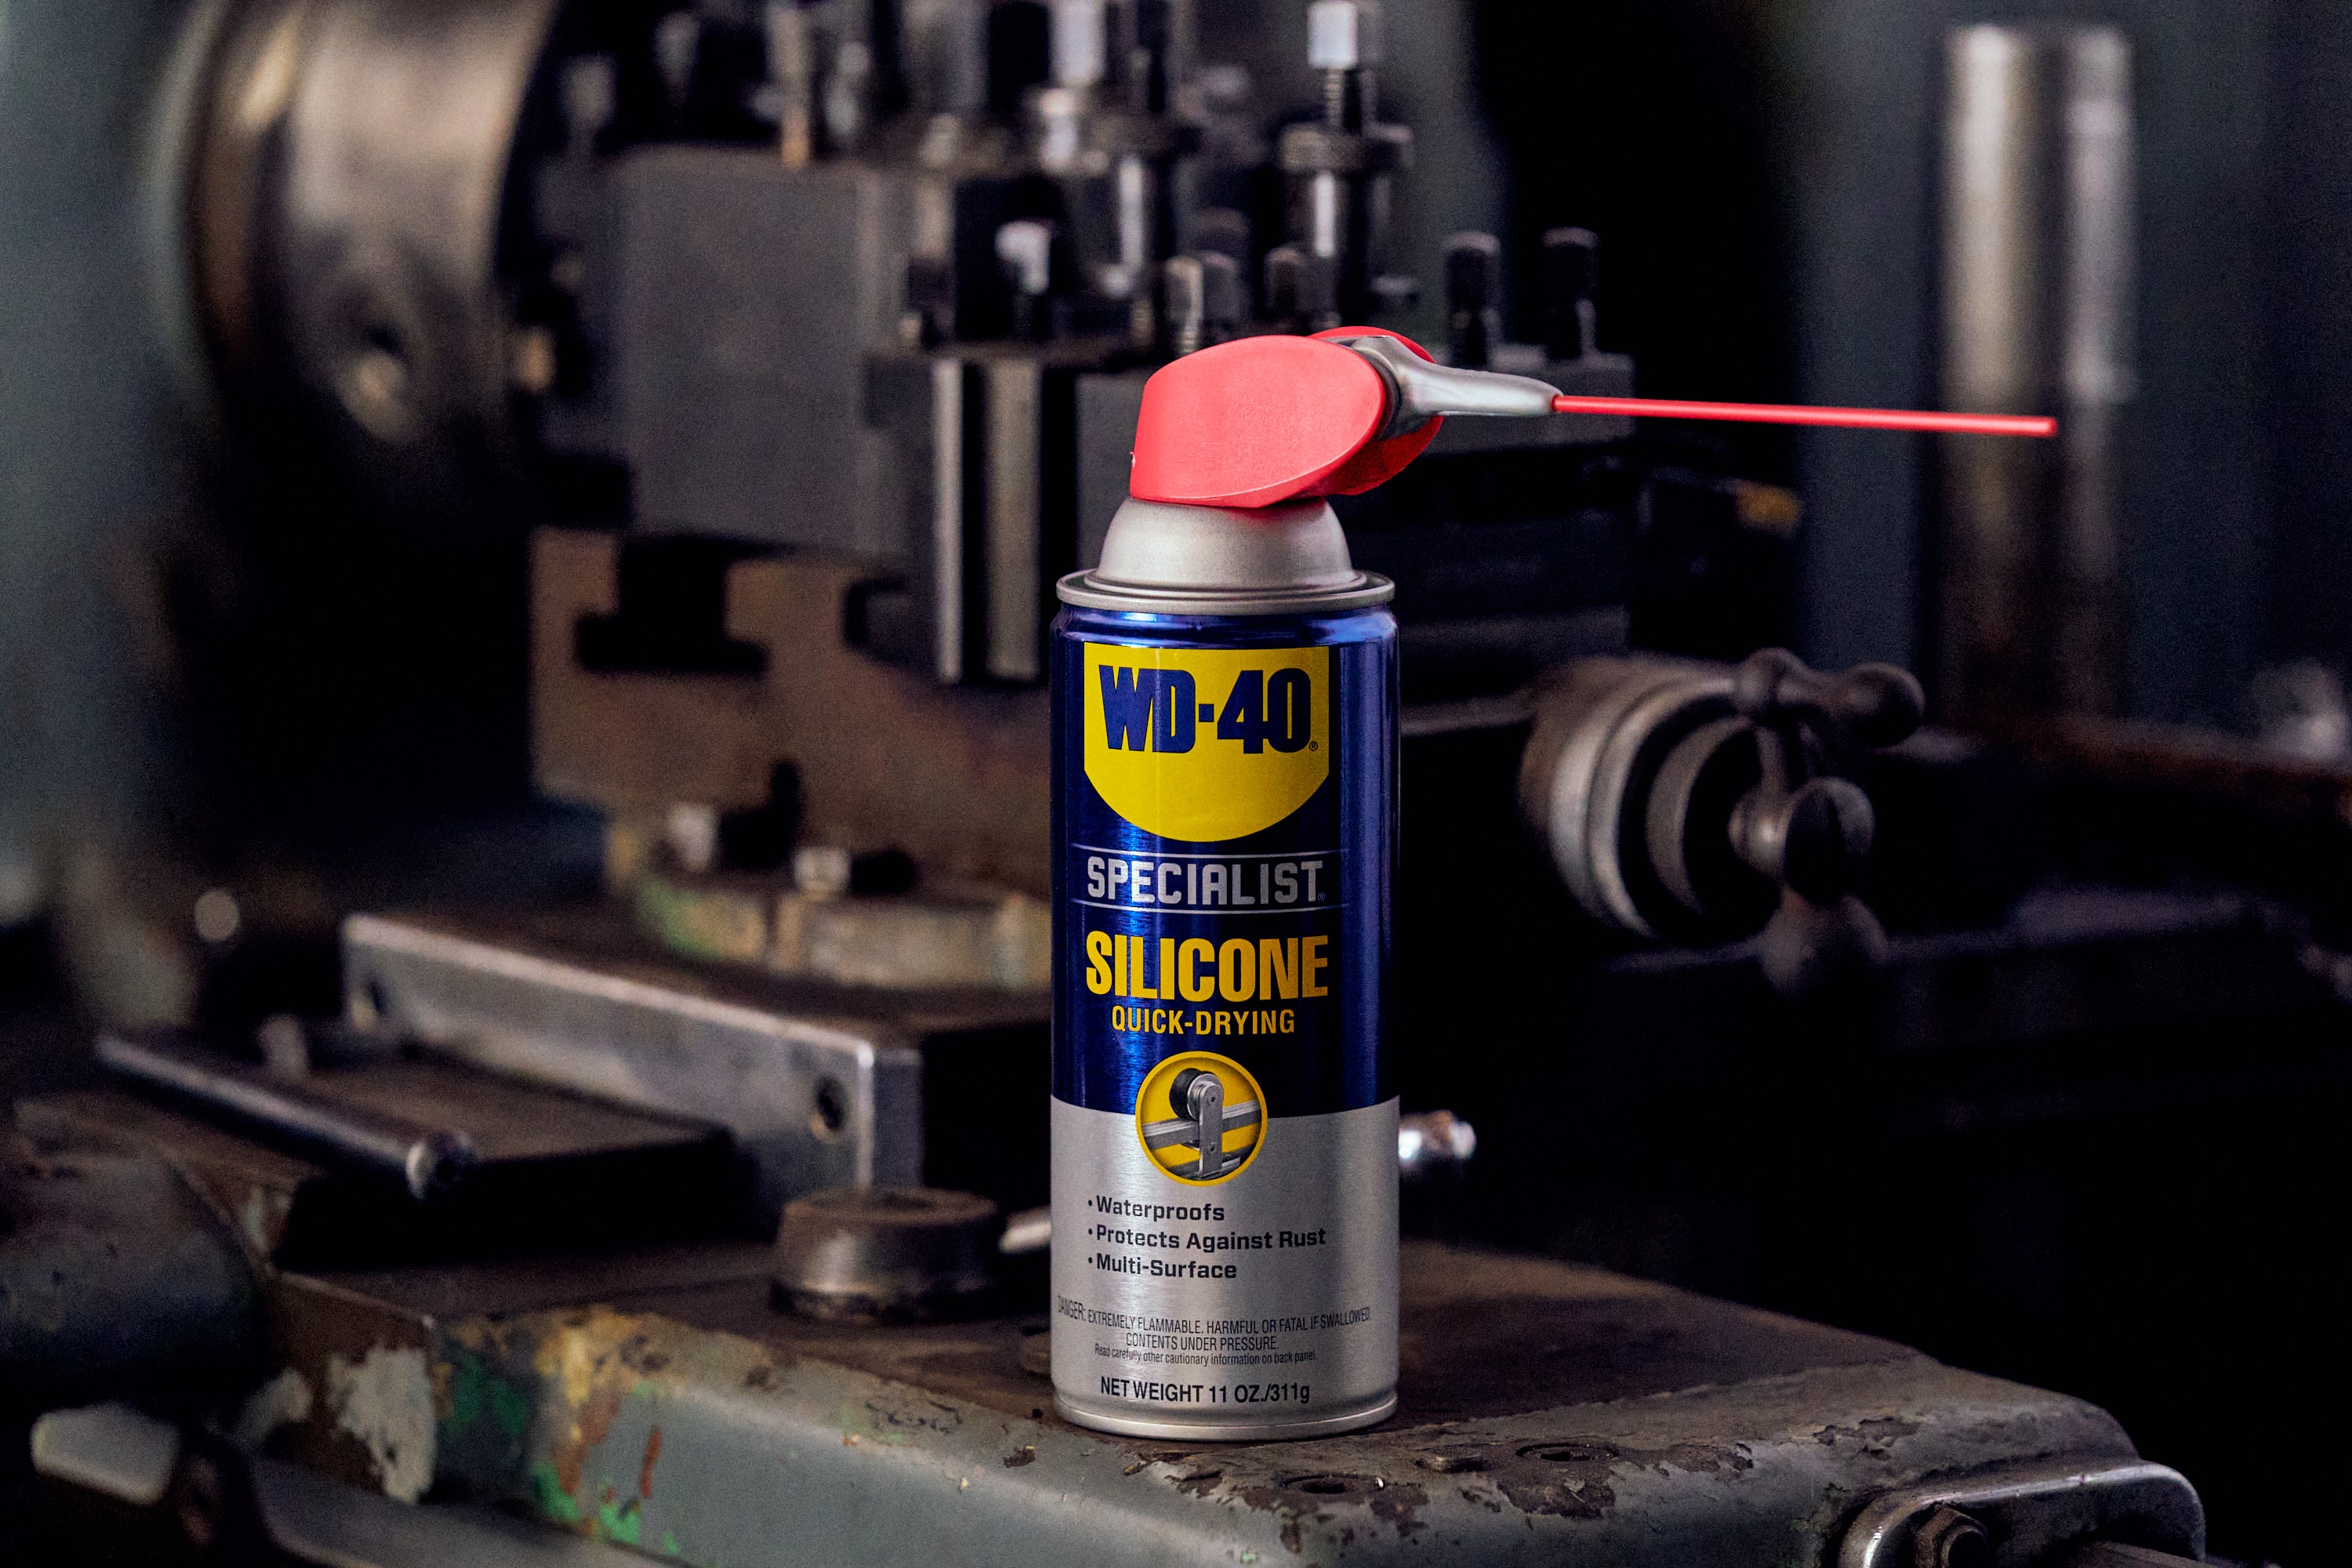 Silicone Lubricant Spray, WD-40 Water Resistant Silicone